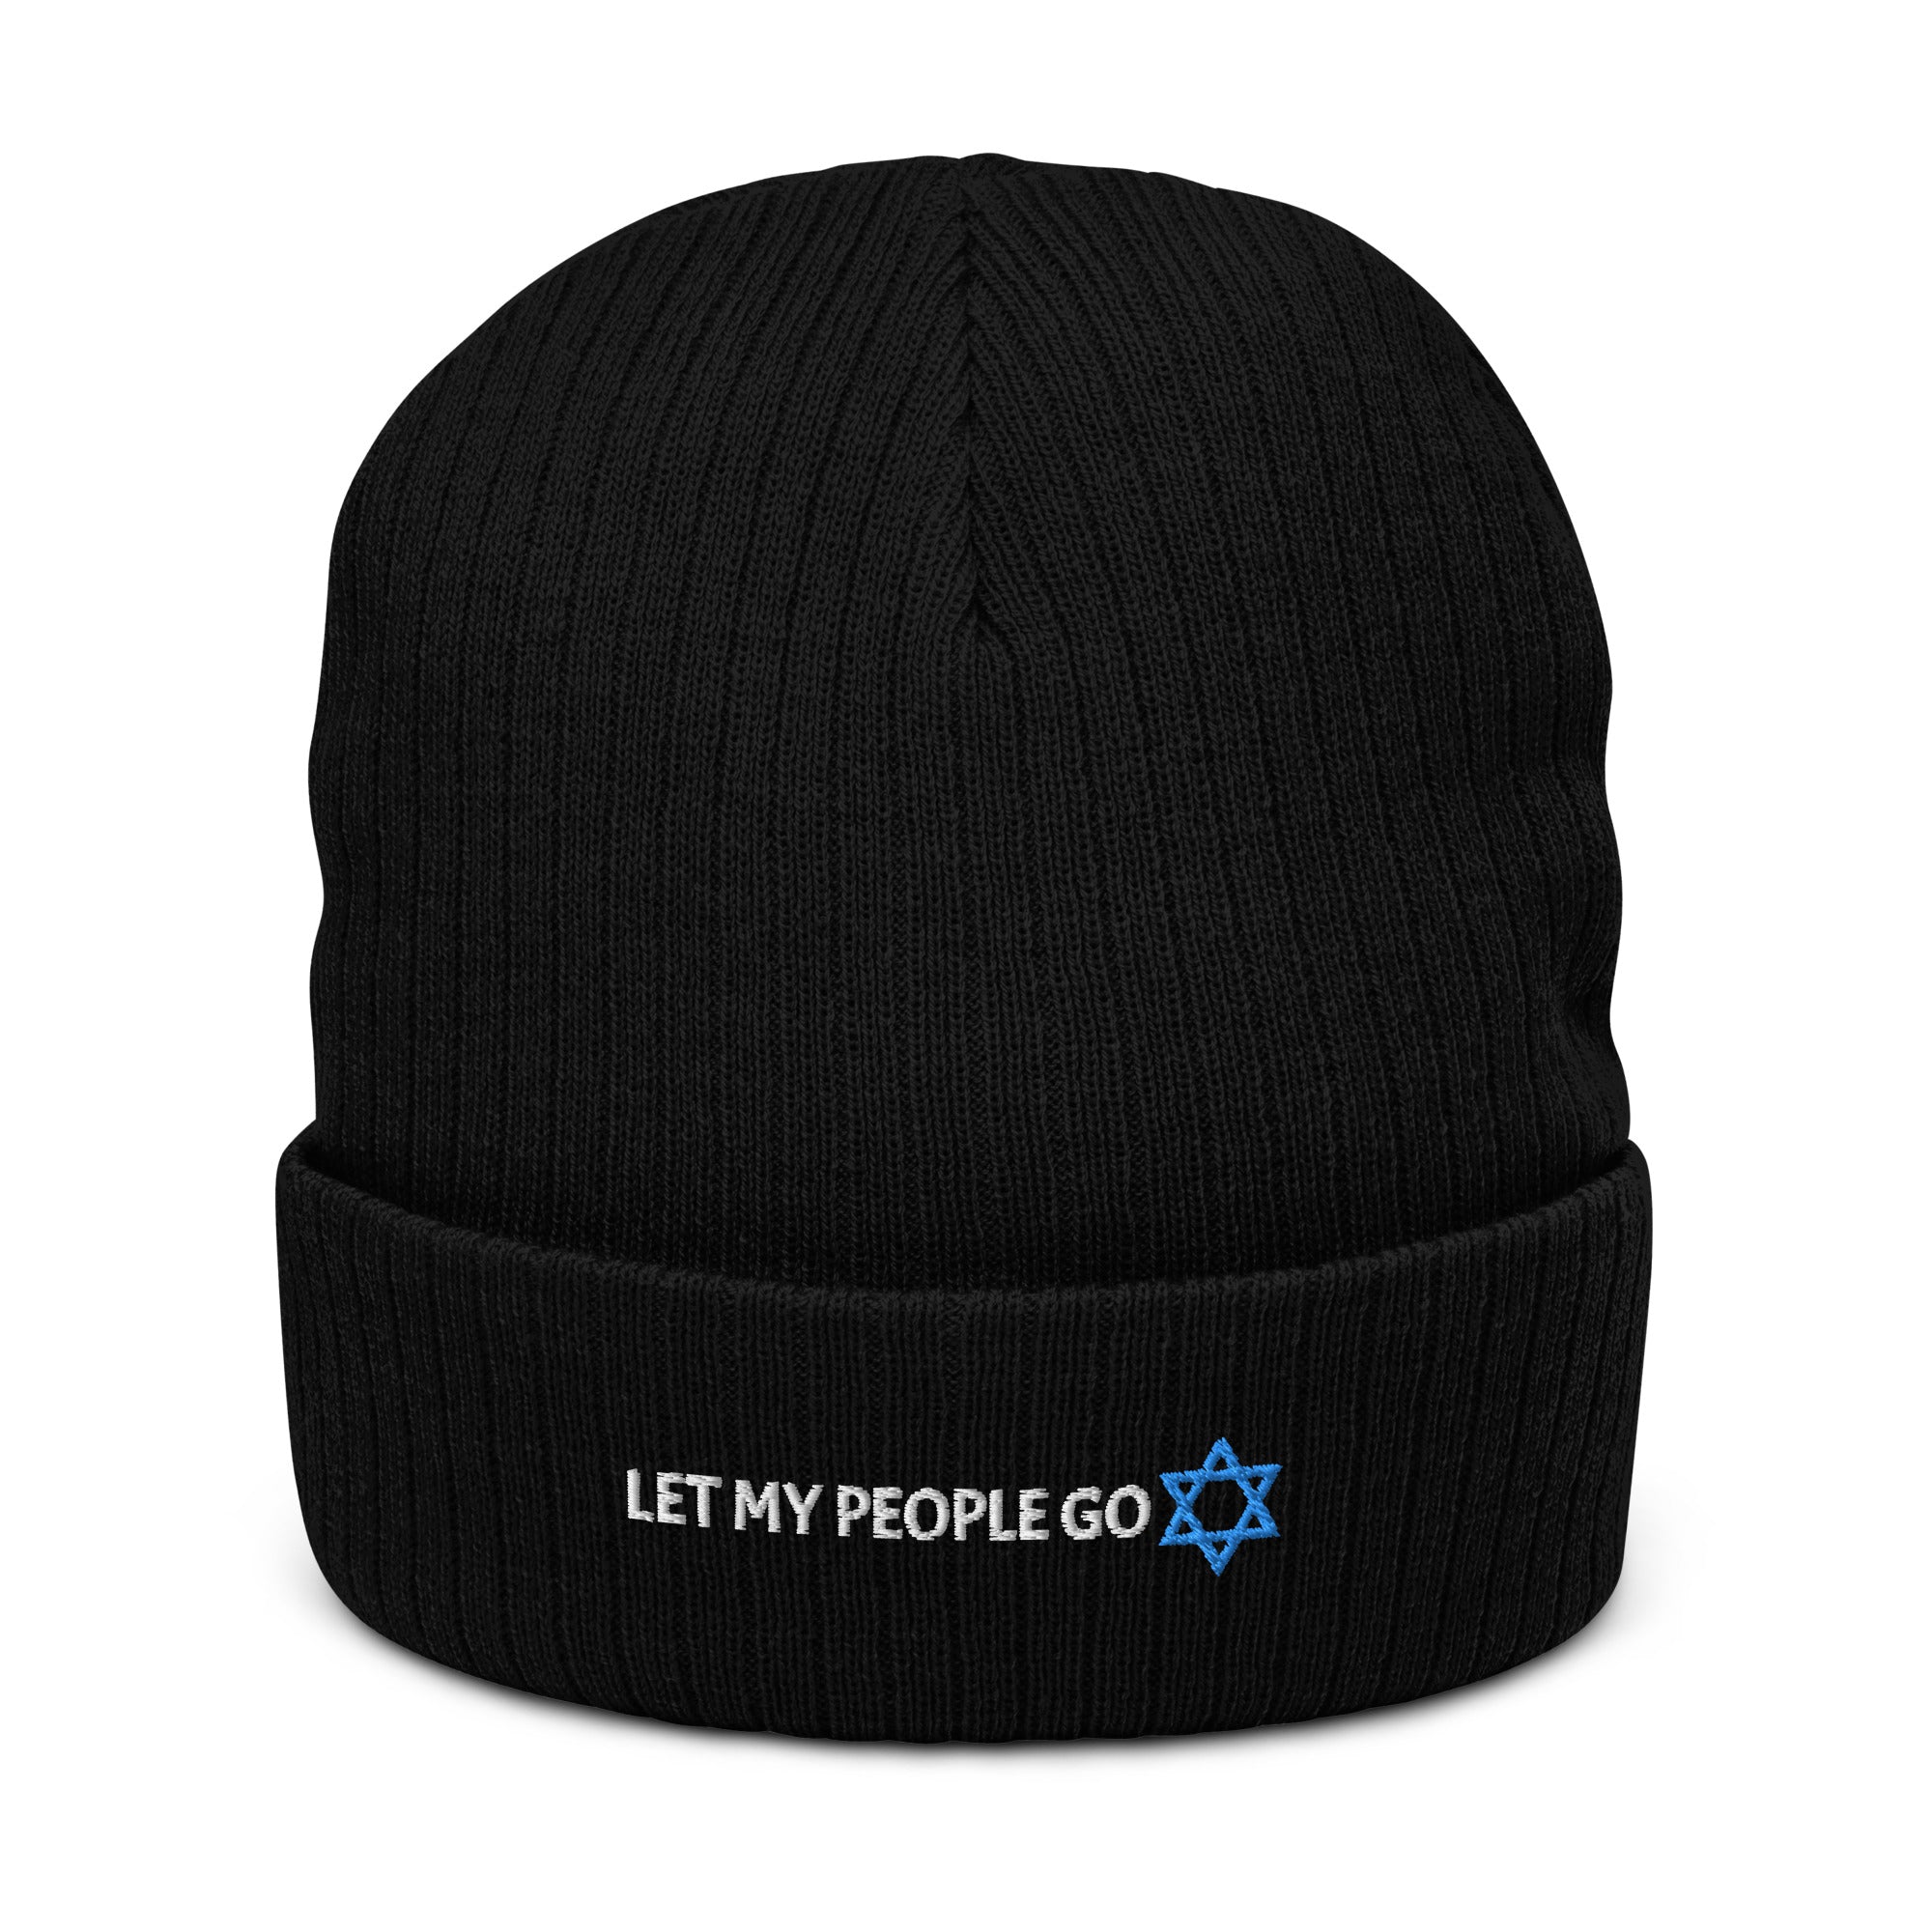 Let My People Go - Ribbed knit beanie